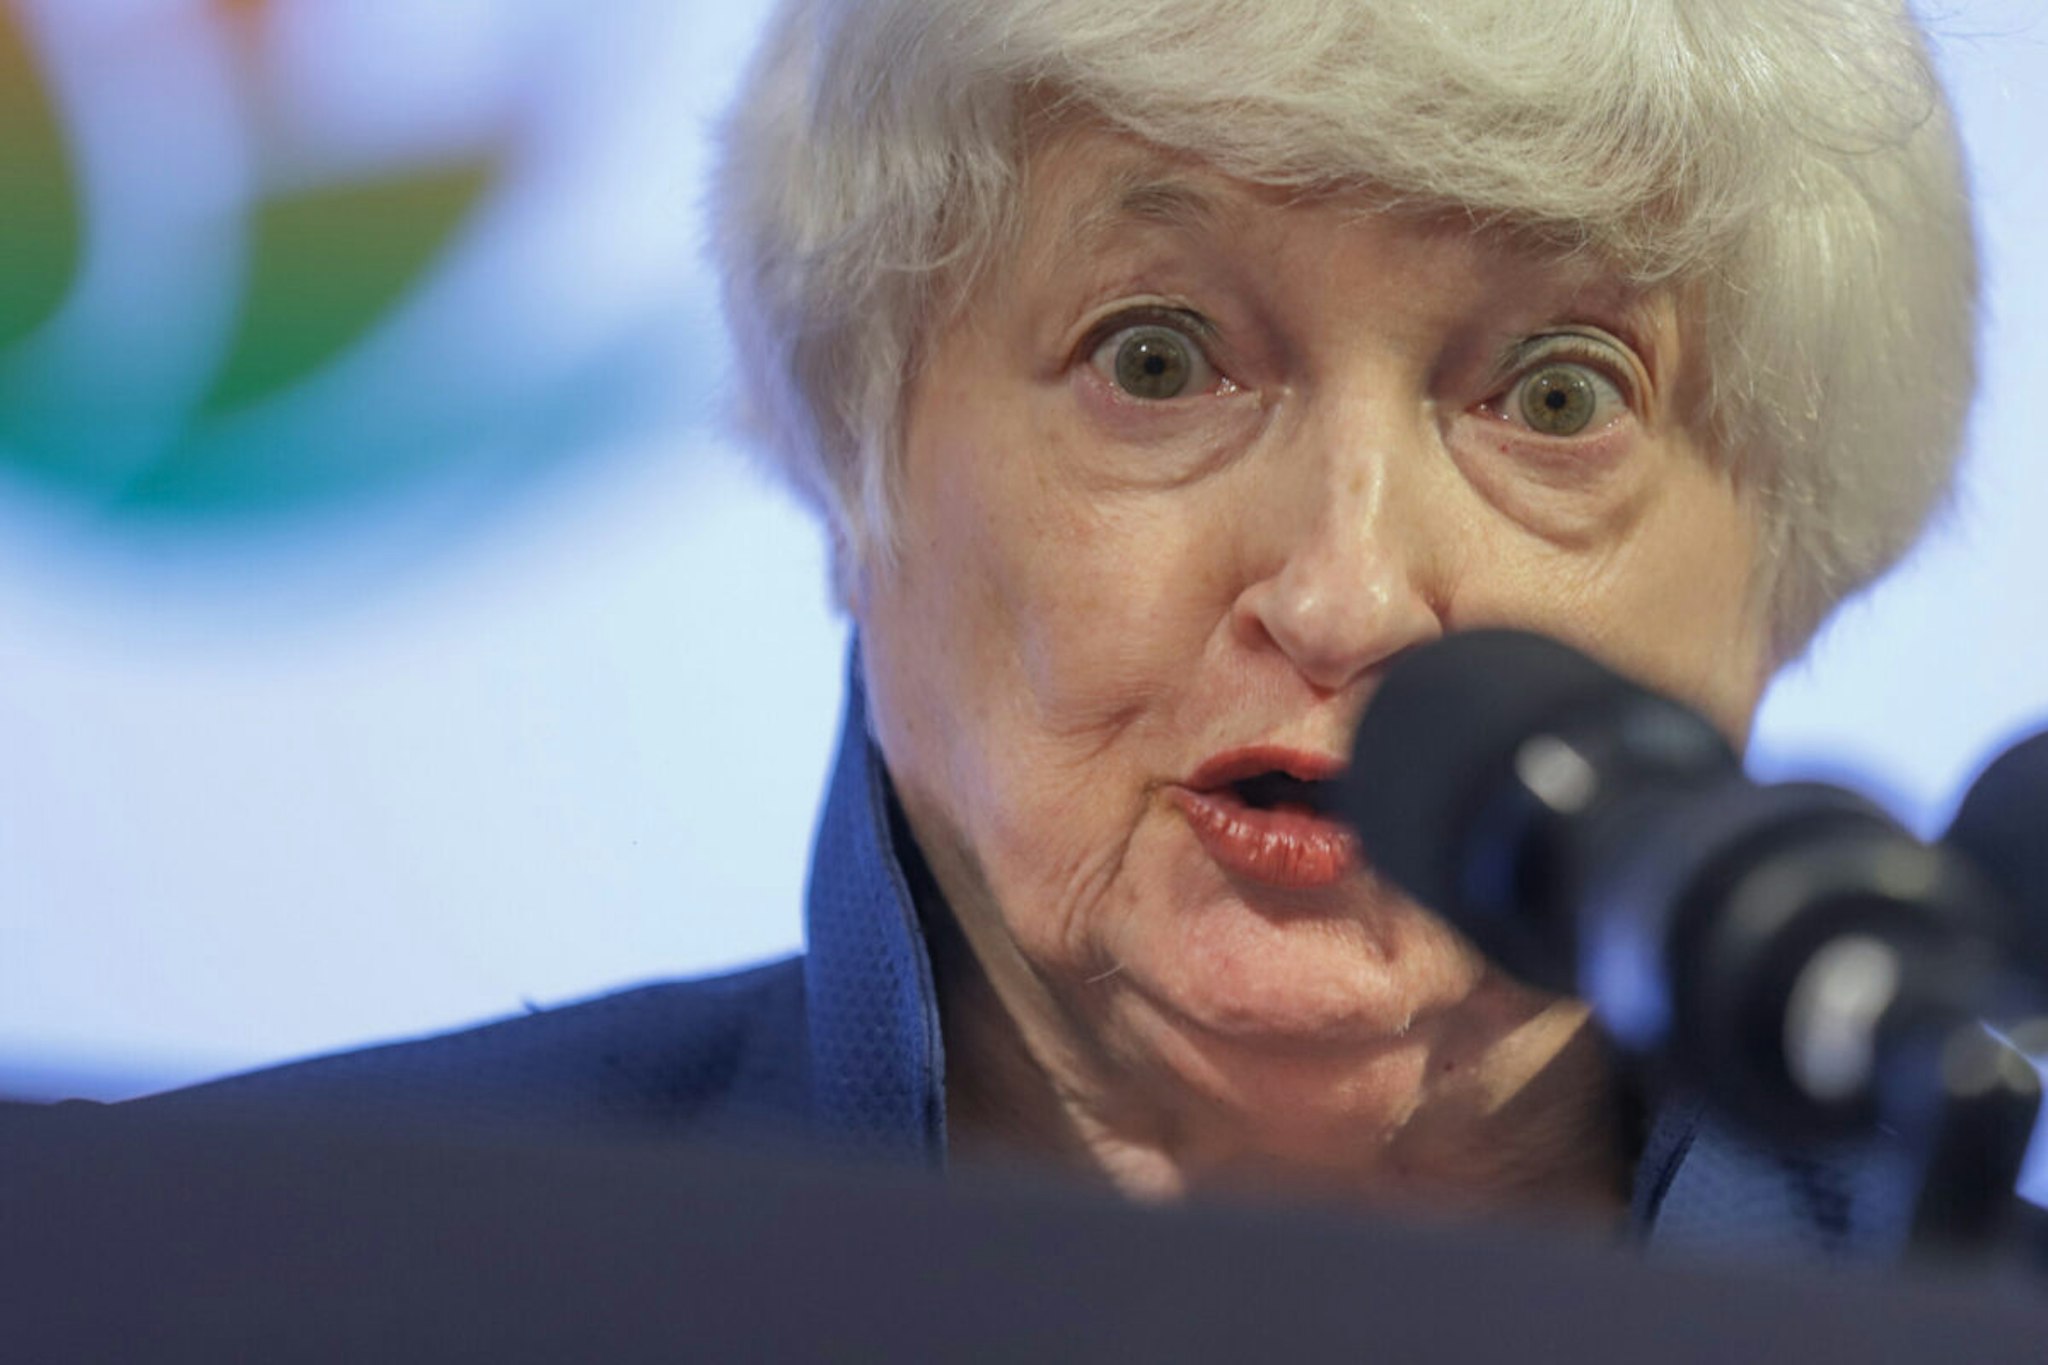 Janet Yellen, US Treasury secretary, speaks during a press conference at the G20 Finance Ministers, Central Bank Governors (FMCBG) and Finance and Central Bank Deputies (FCBD) meetings in Gandhinagar, India, on Sunday, July 16, 2023.